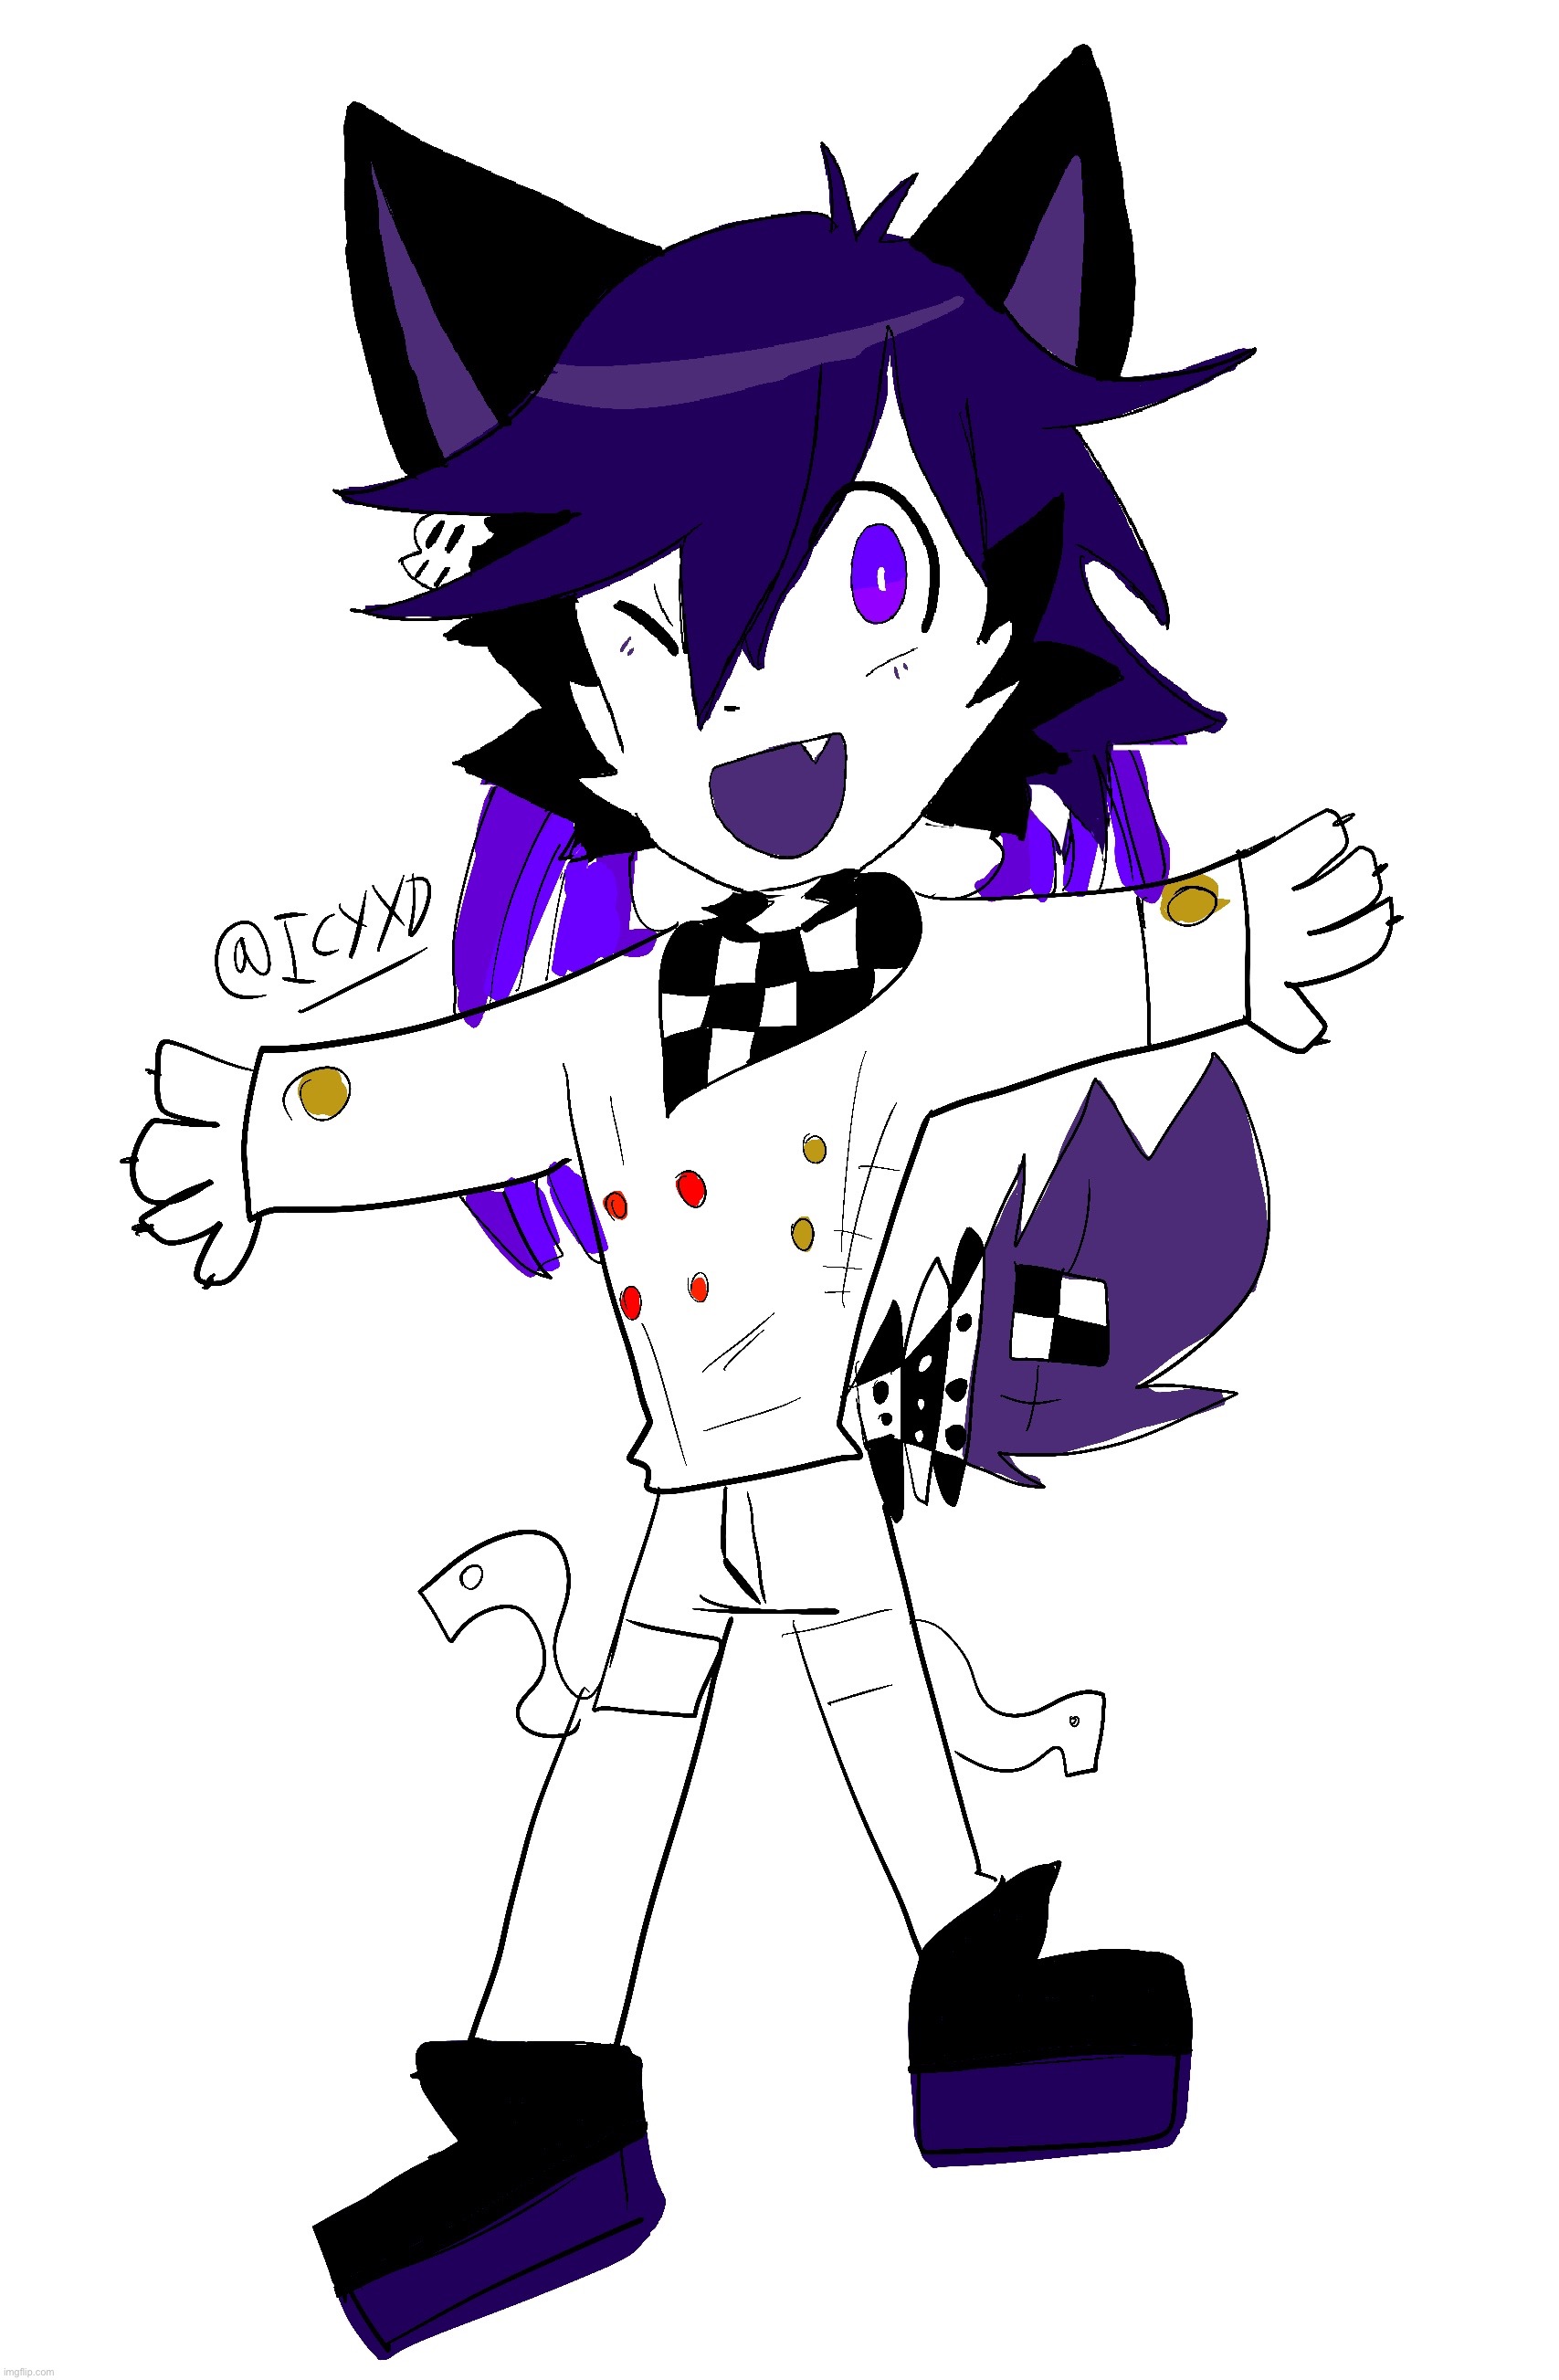 90 follower drawing challenge: Draw your OC cosplaying as your favourite character from your favourite fandom. Here’s mine | image tagged in kokichi oma,danganronpa,icyxd | made w/ Imgflip meme maker